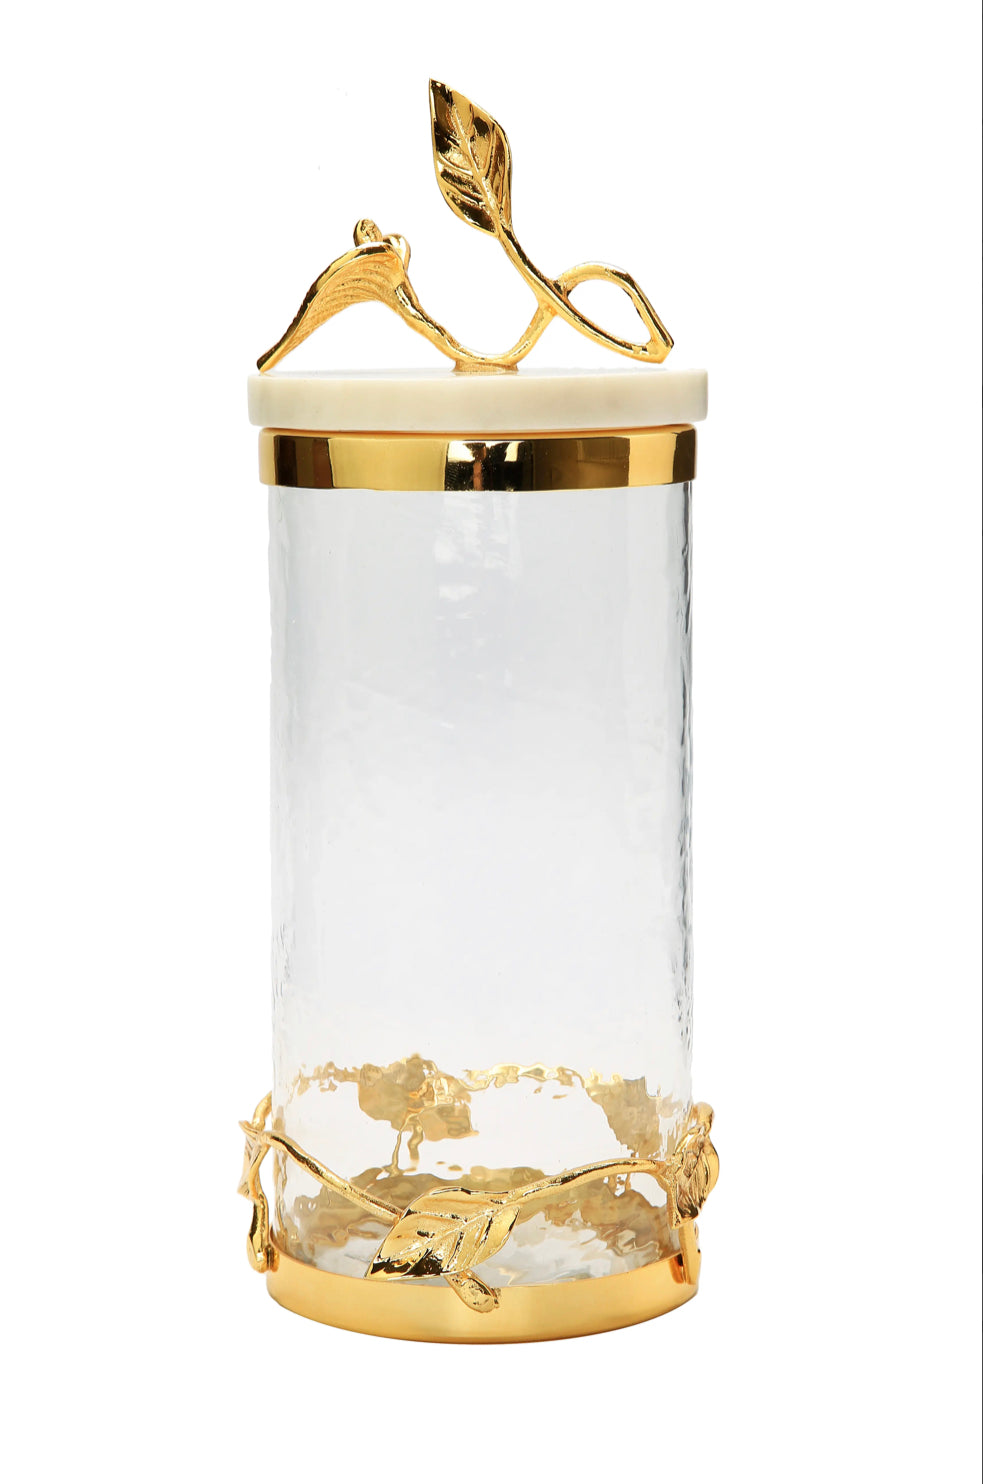 Glass Canister Gold Leaf Design and Marble Lid - Gold Trim